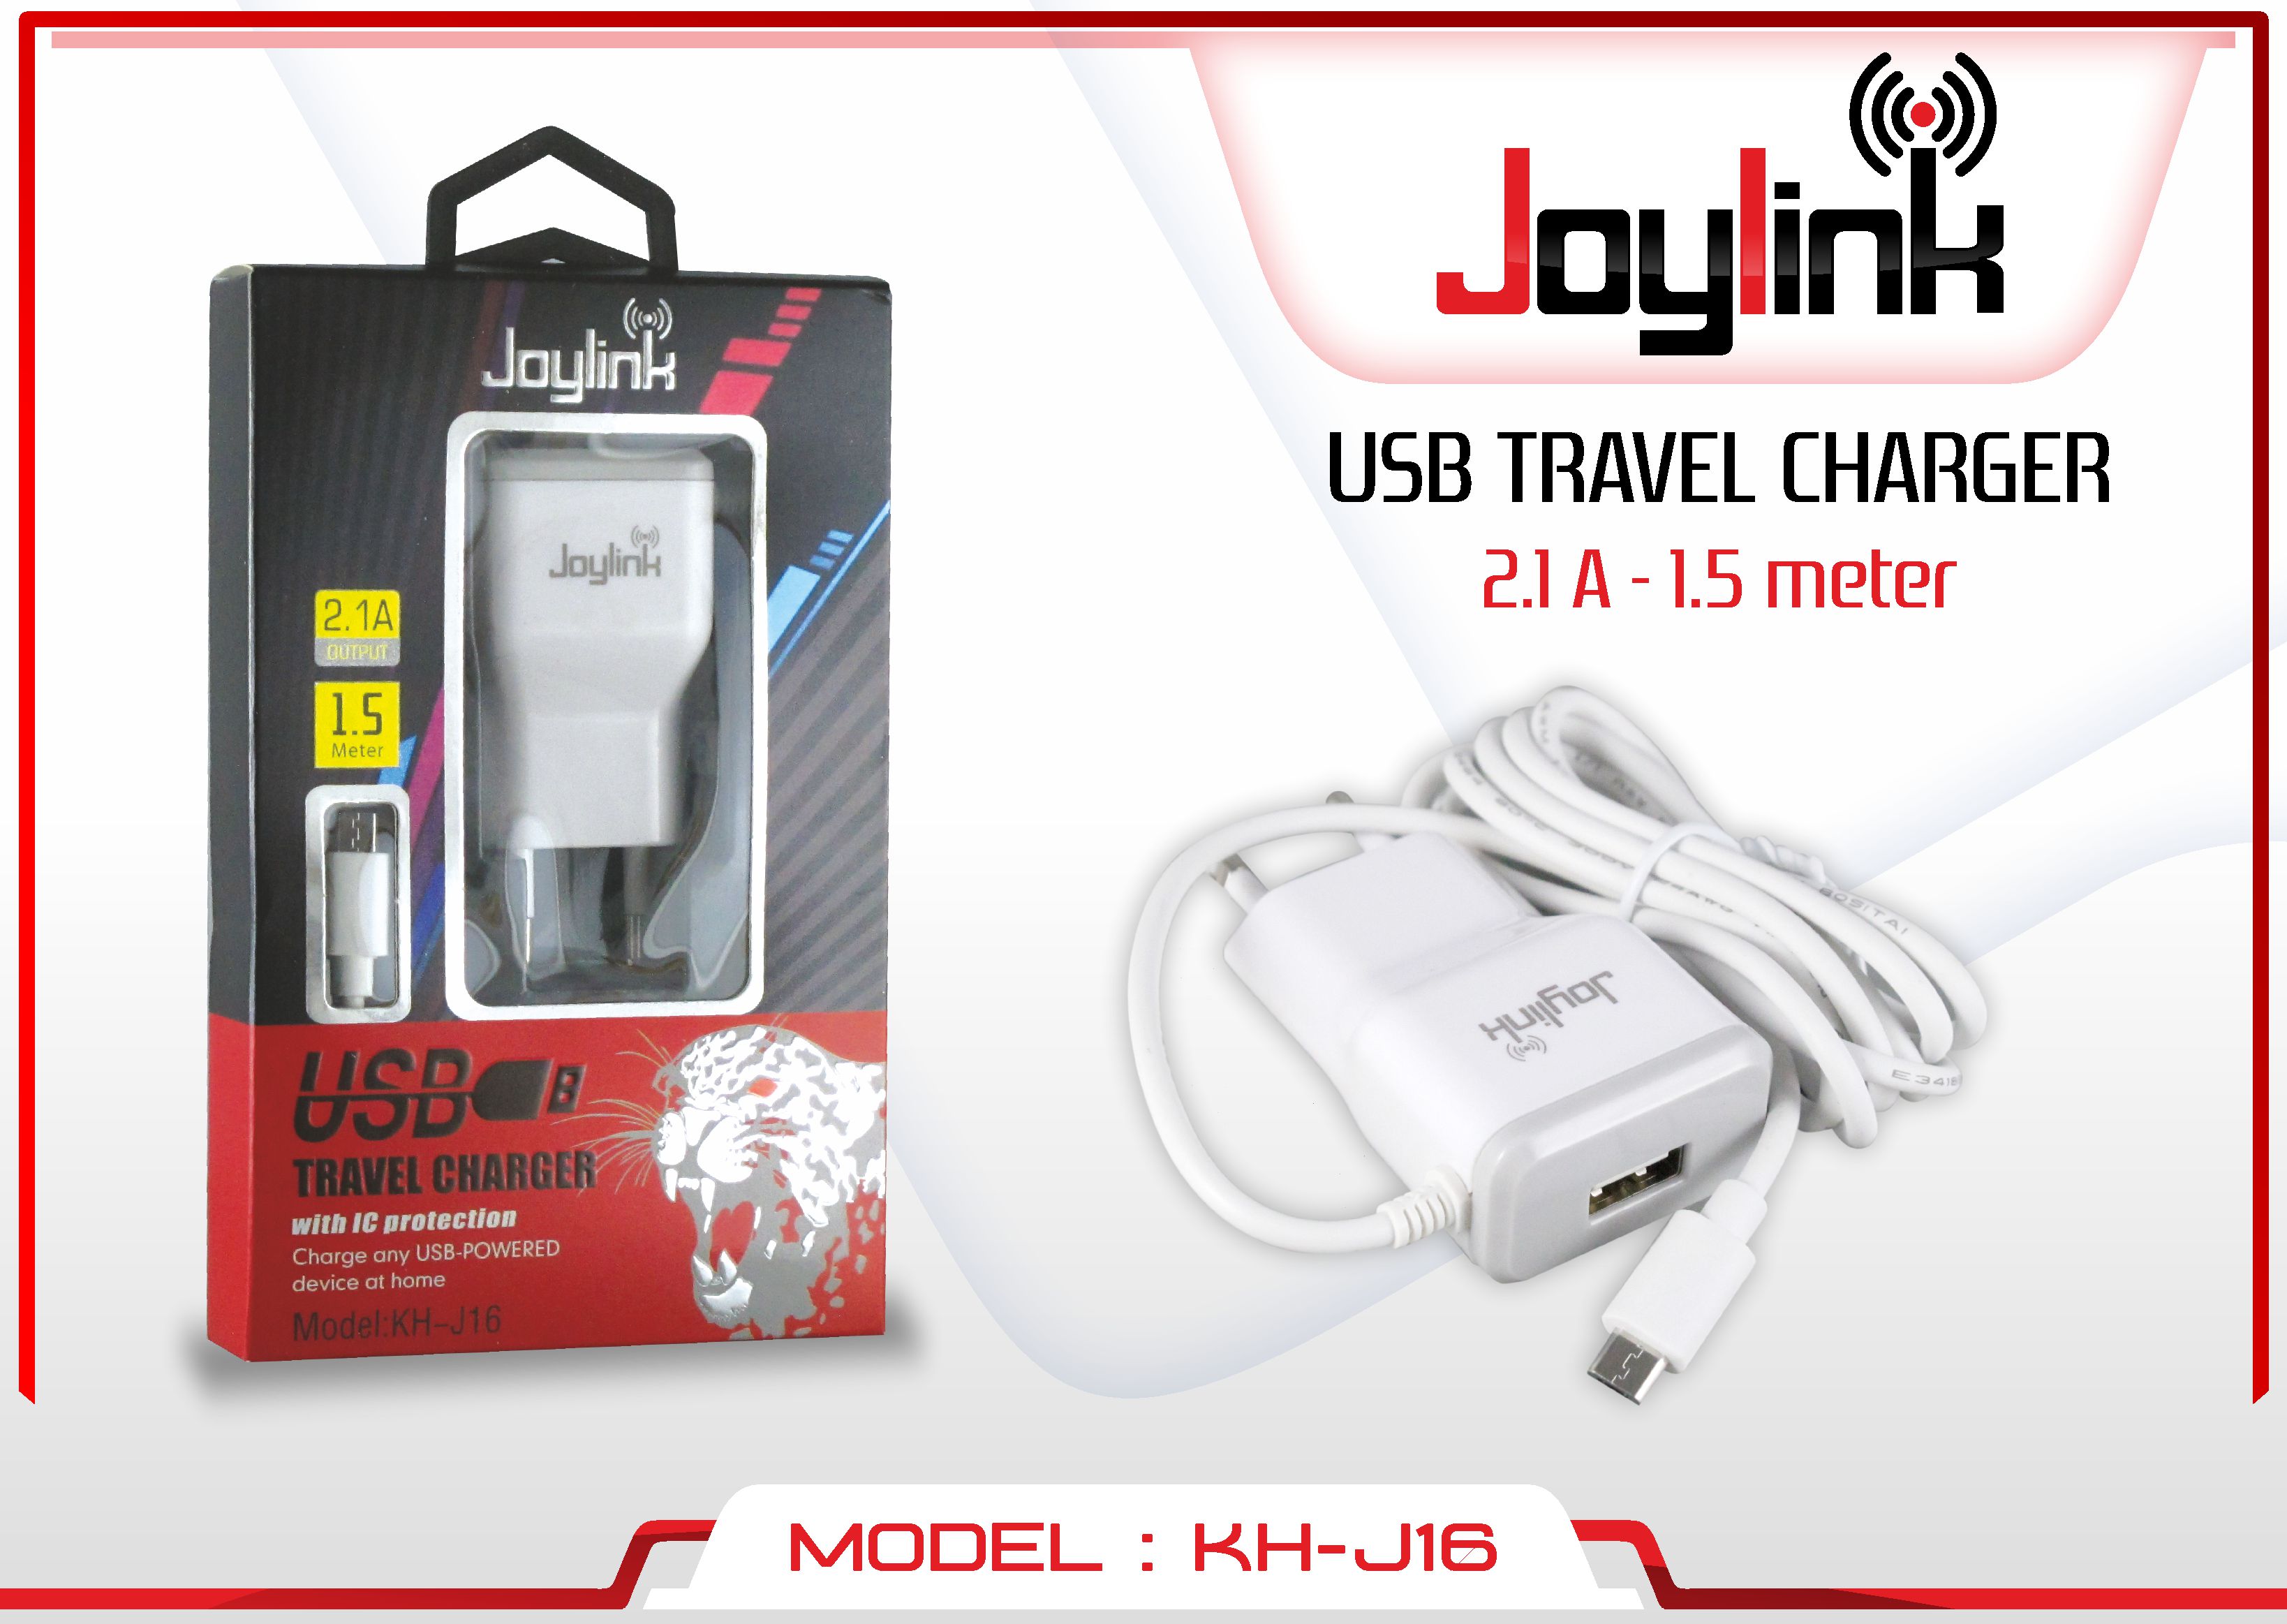 KH-J27 MABKO CHARGER 3.4A